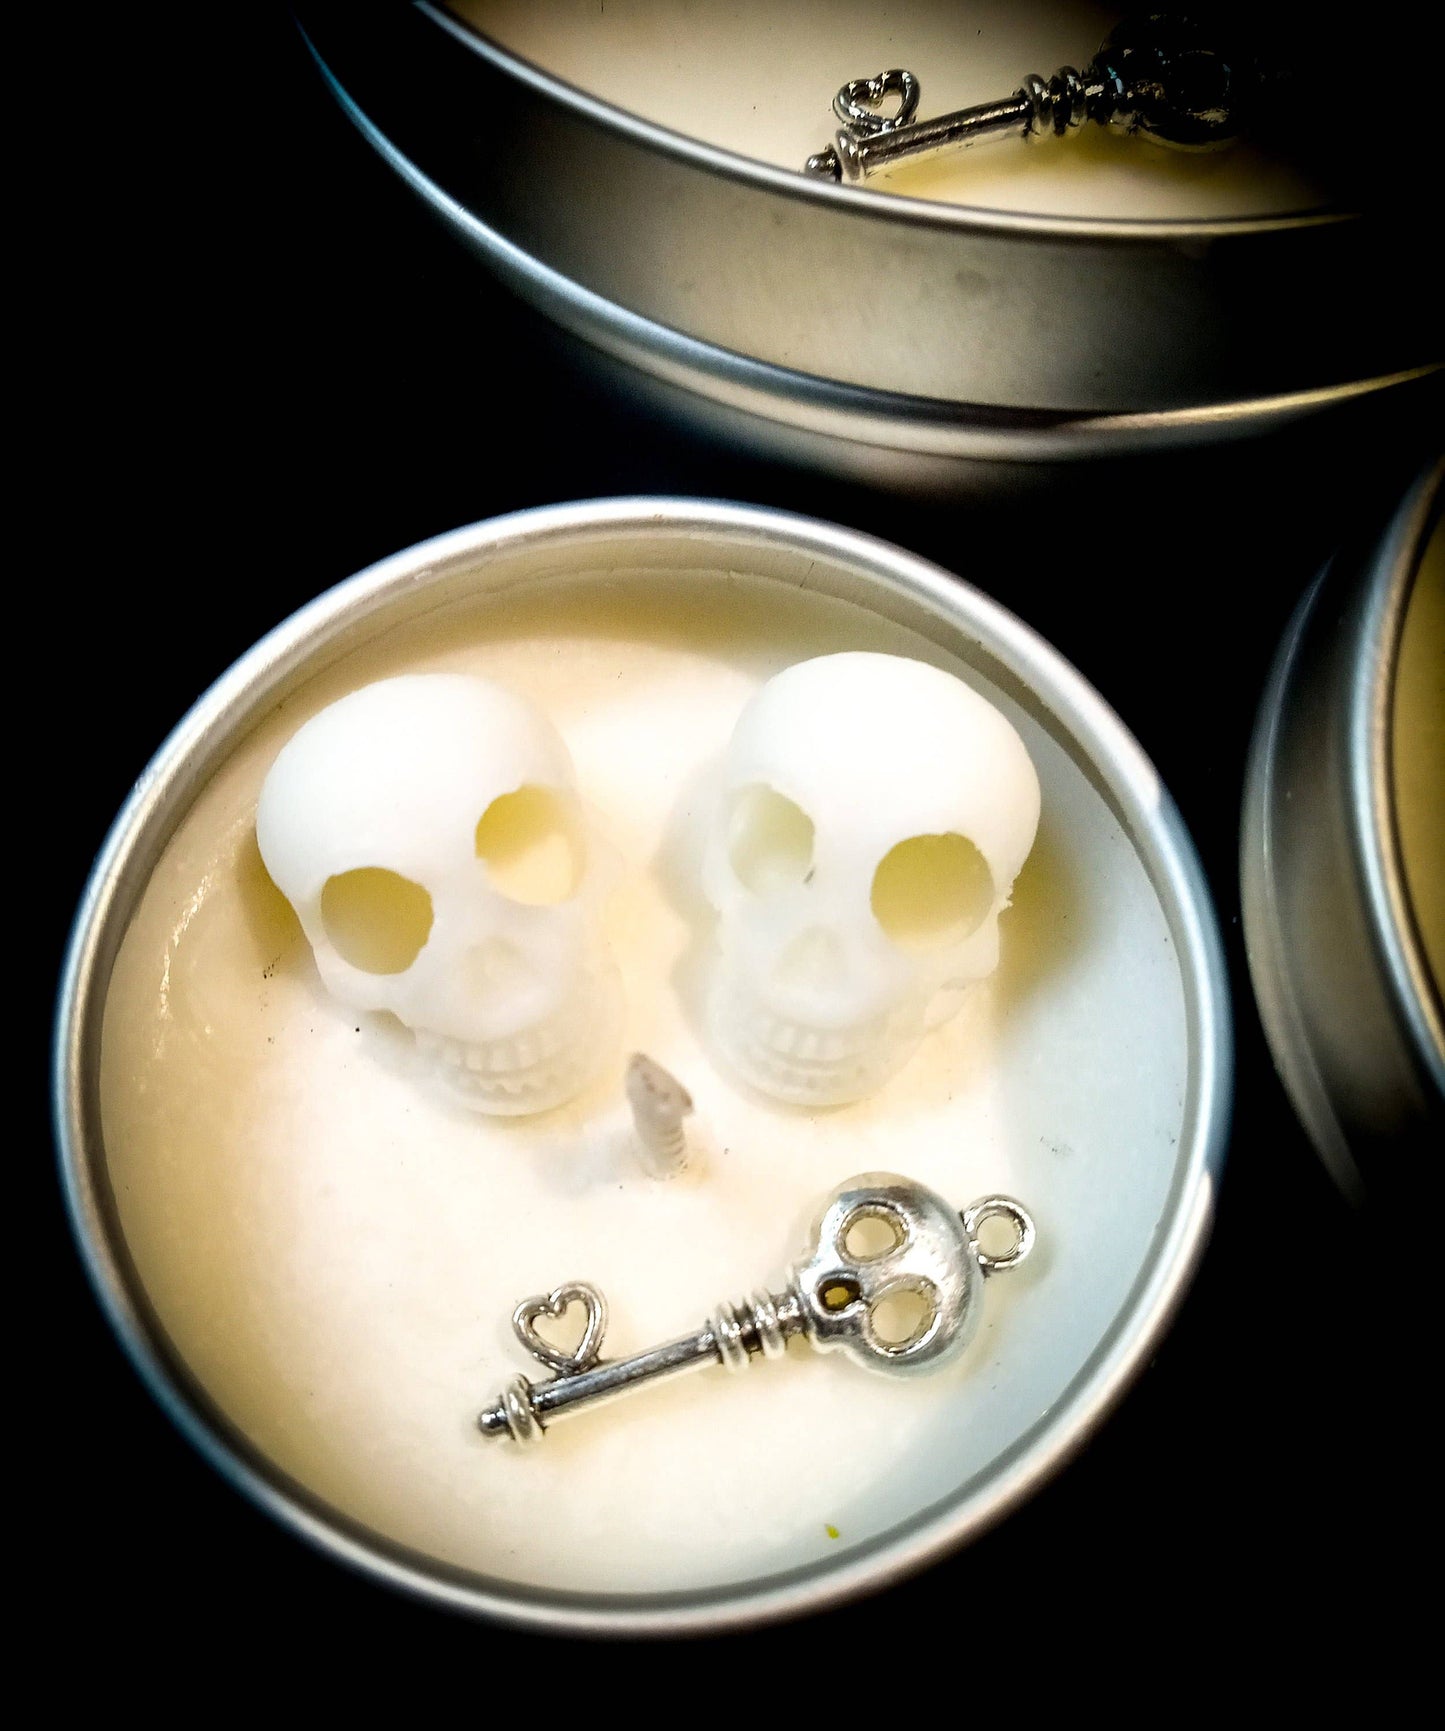 Key To My Heart skull candle: 2 oz / Love spell